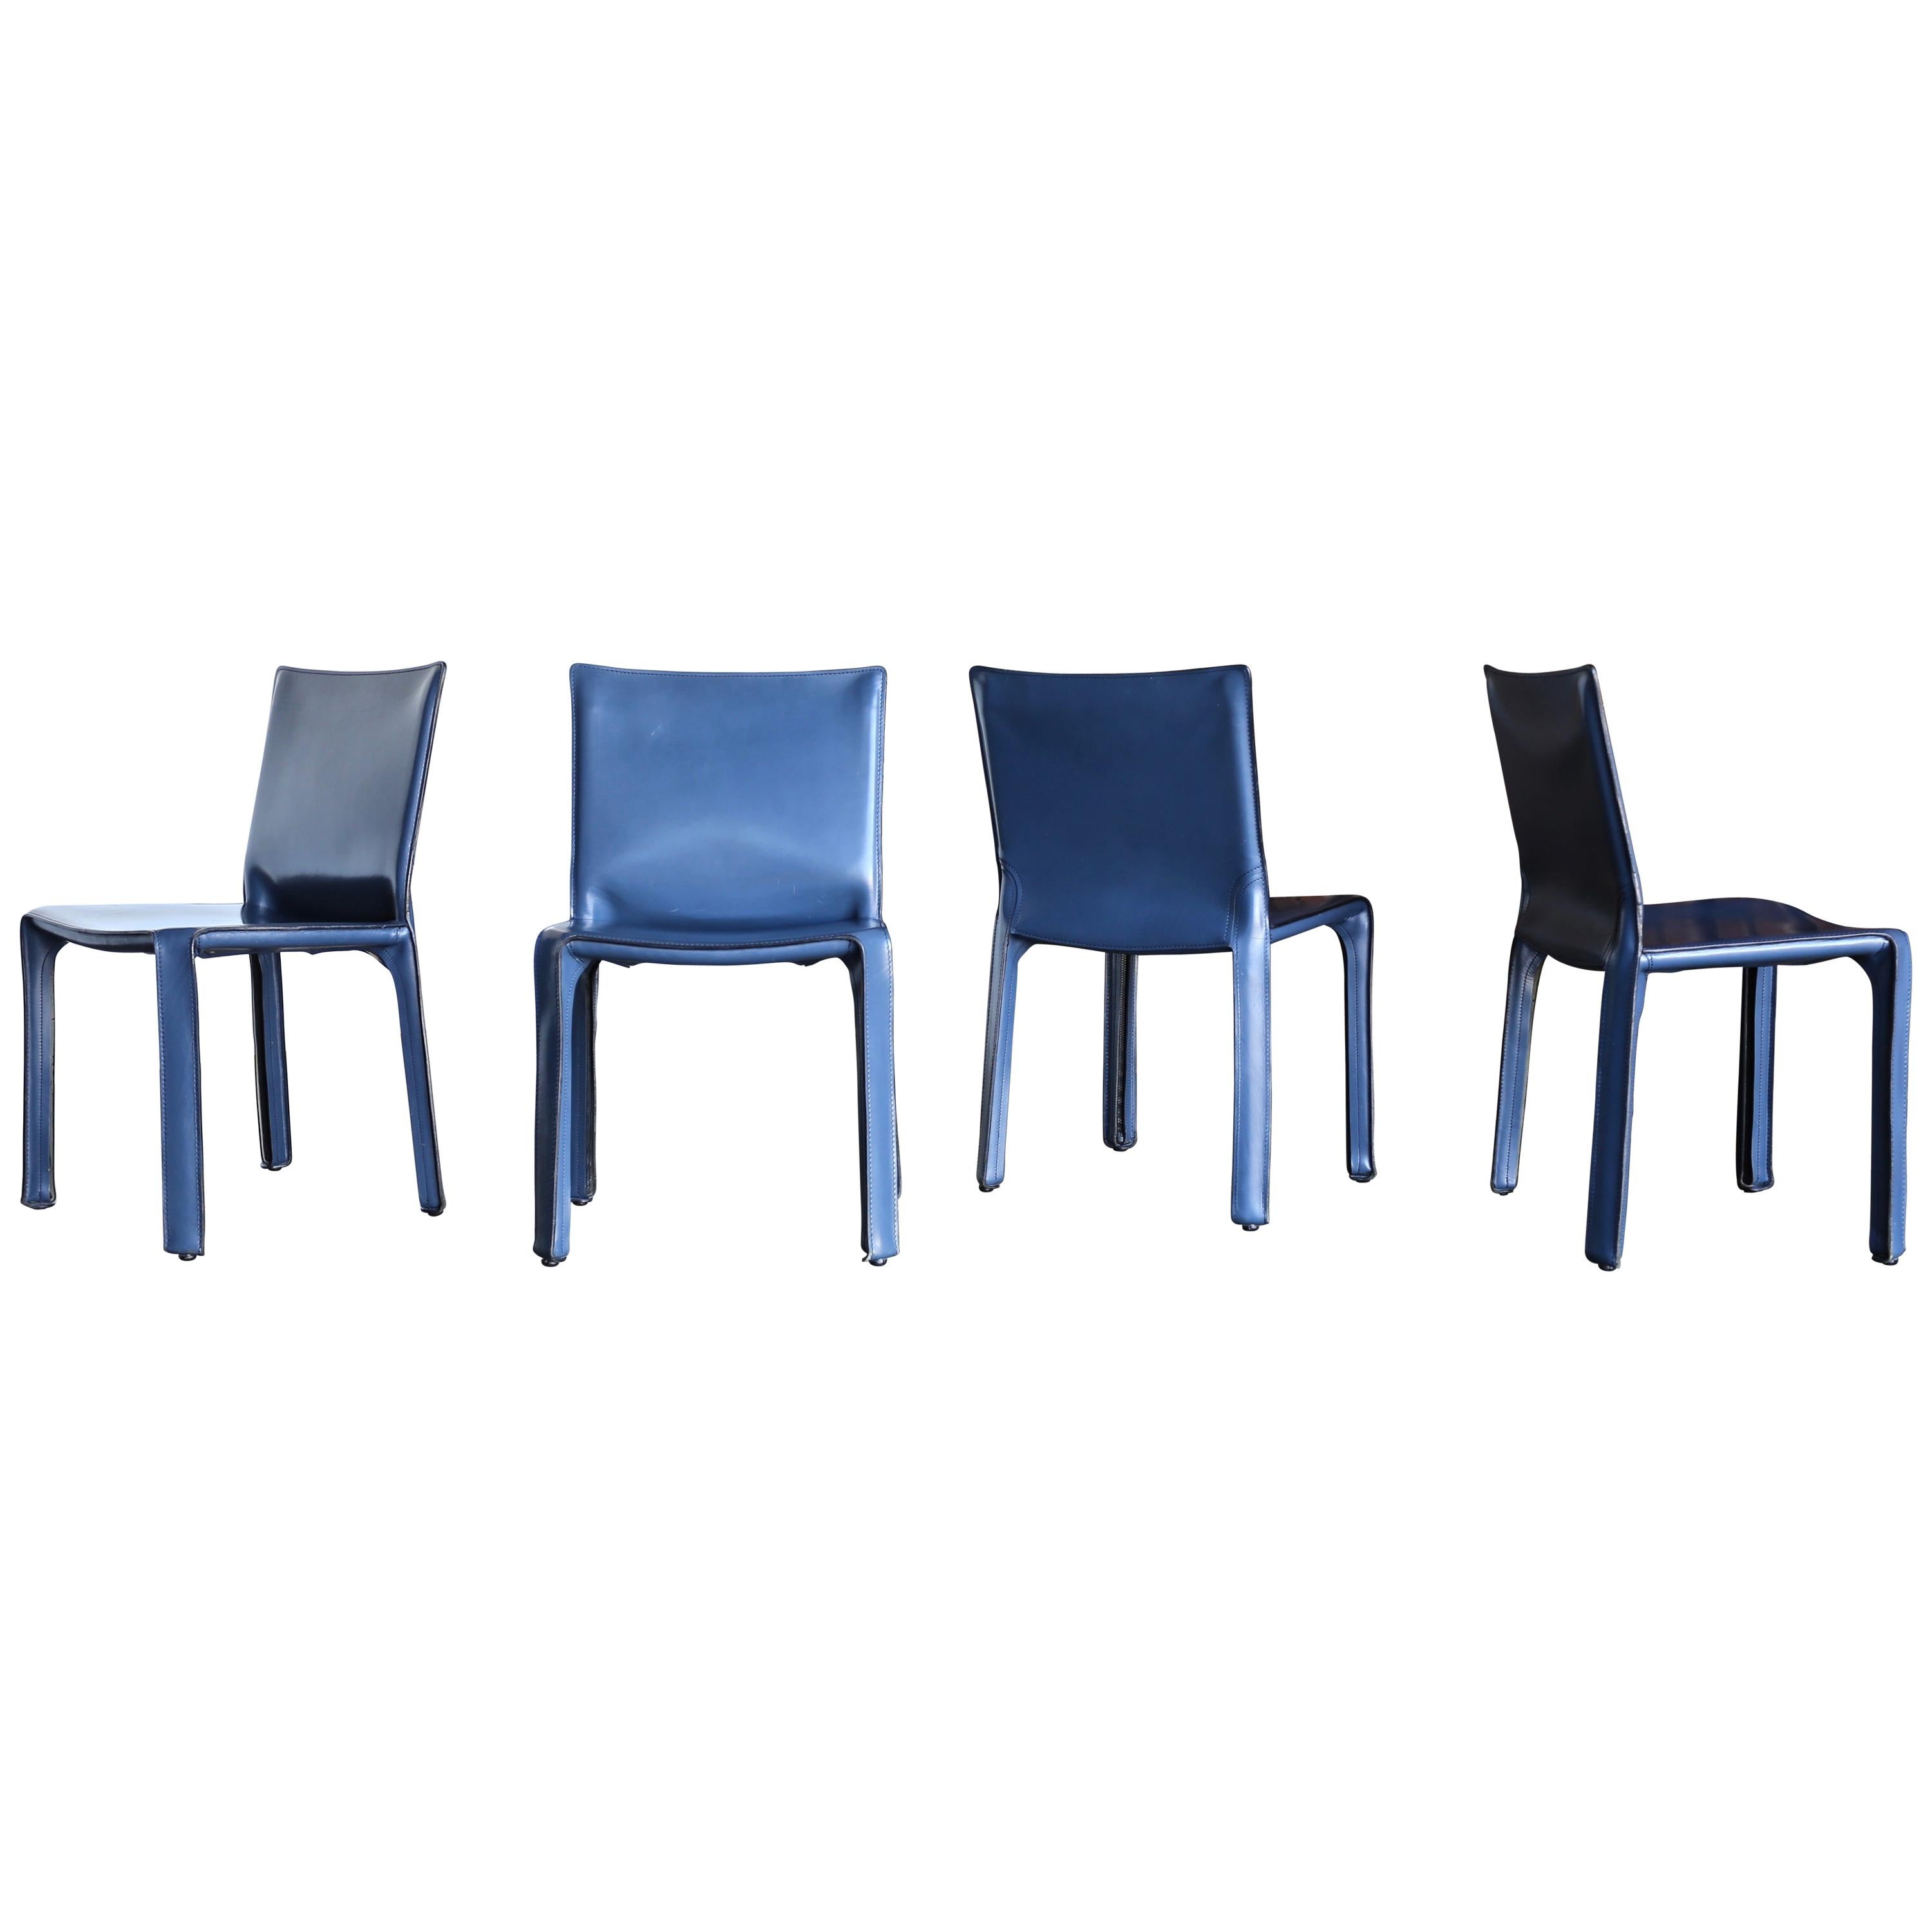 Mario Bellini Blue Leather "Cab" Chairs for Cassina, circa 1985